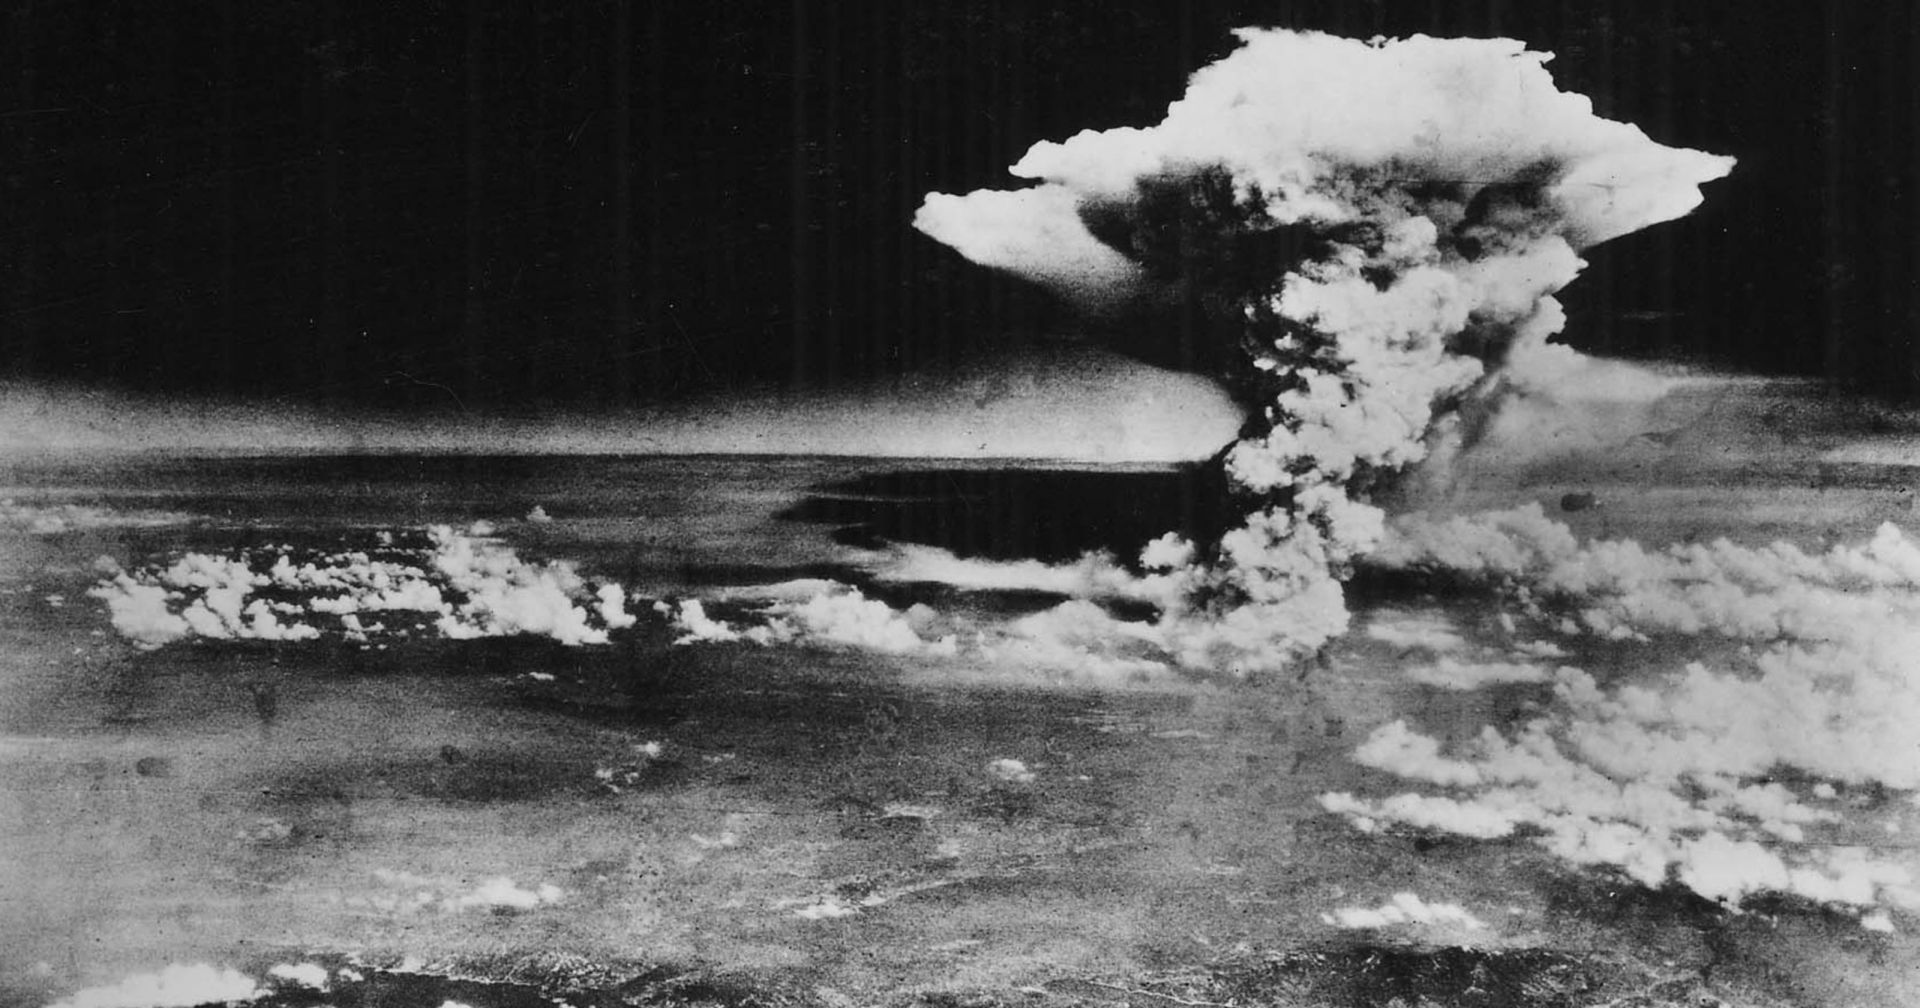 The Soviet Union detonated its first atomic bomb on August 29, 1949, at the Semipalatinsk Test Site in Kazakhstan. The event ended America's monopoly on atomic weaponry and launched the Cold War.